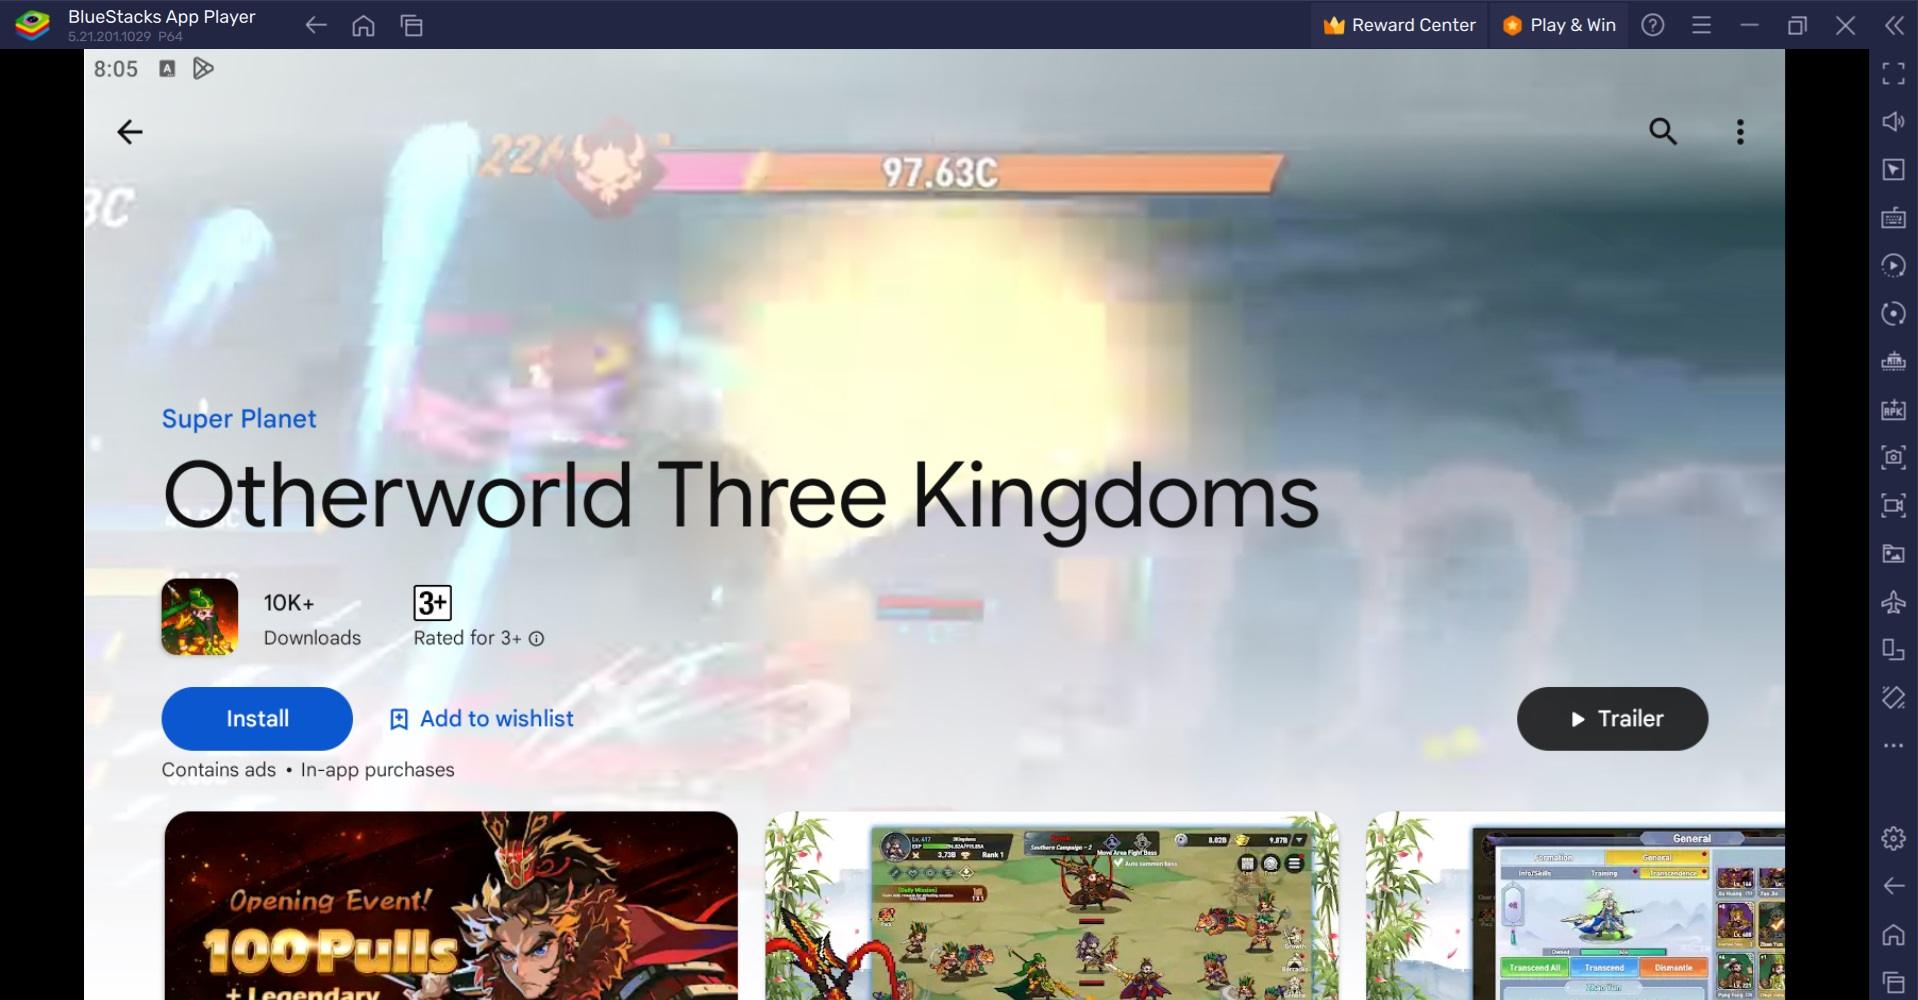 How to Play Otherworld Three Kingdoms on PC with BlueStacks